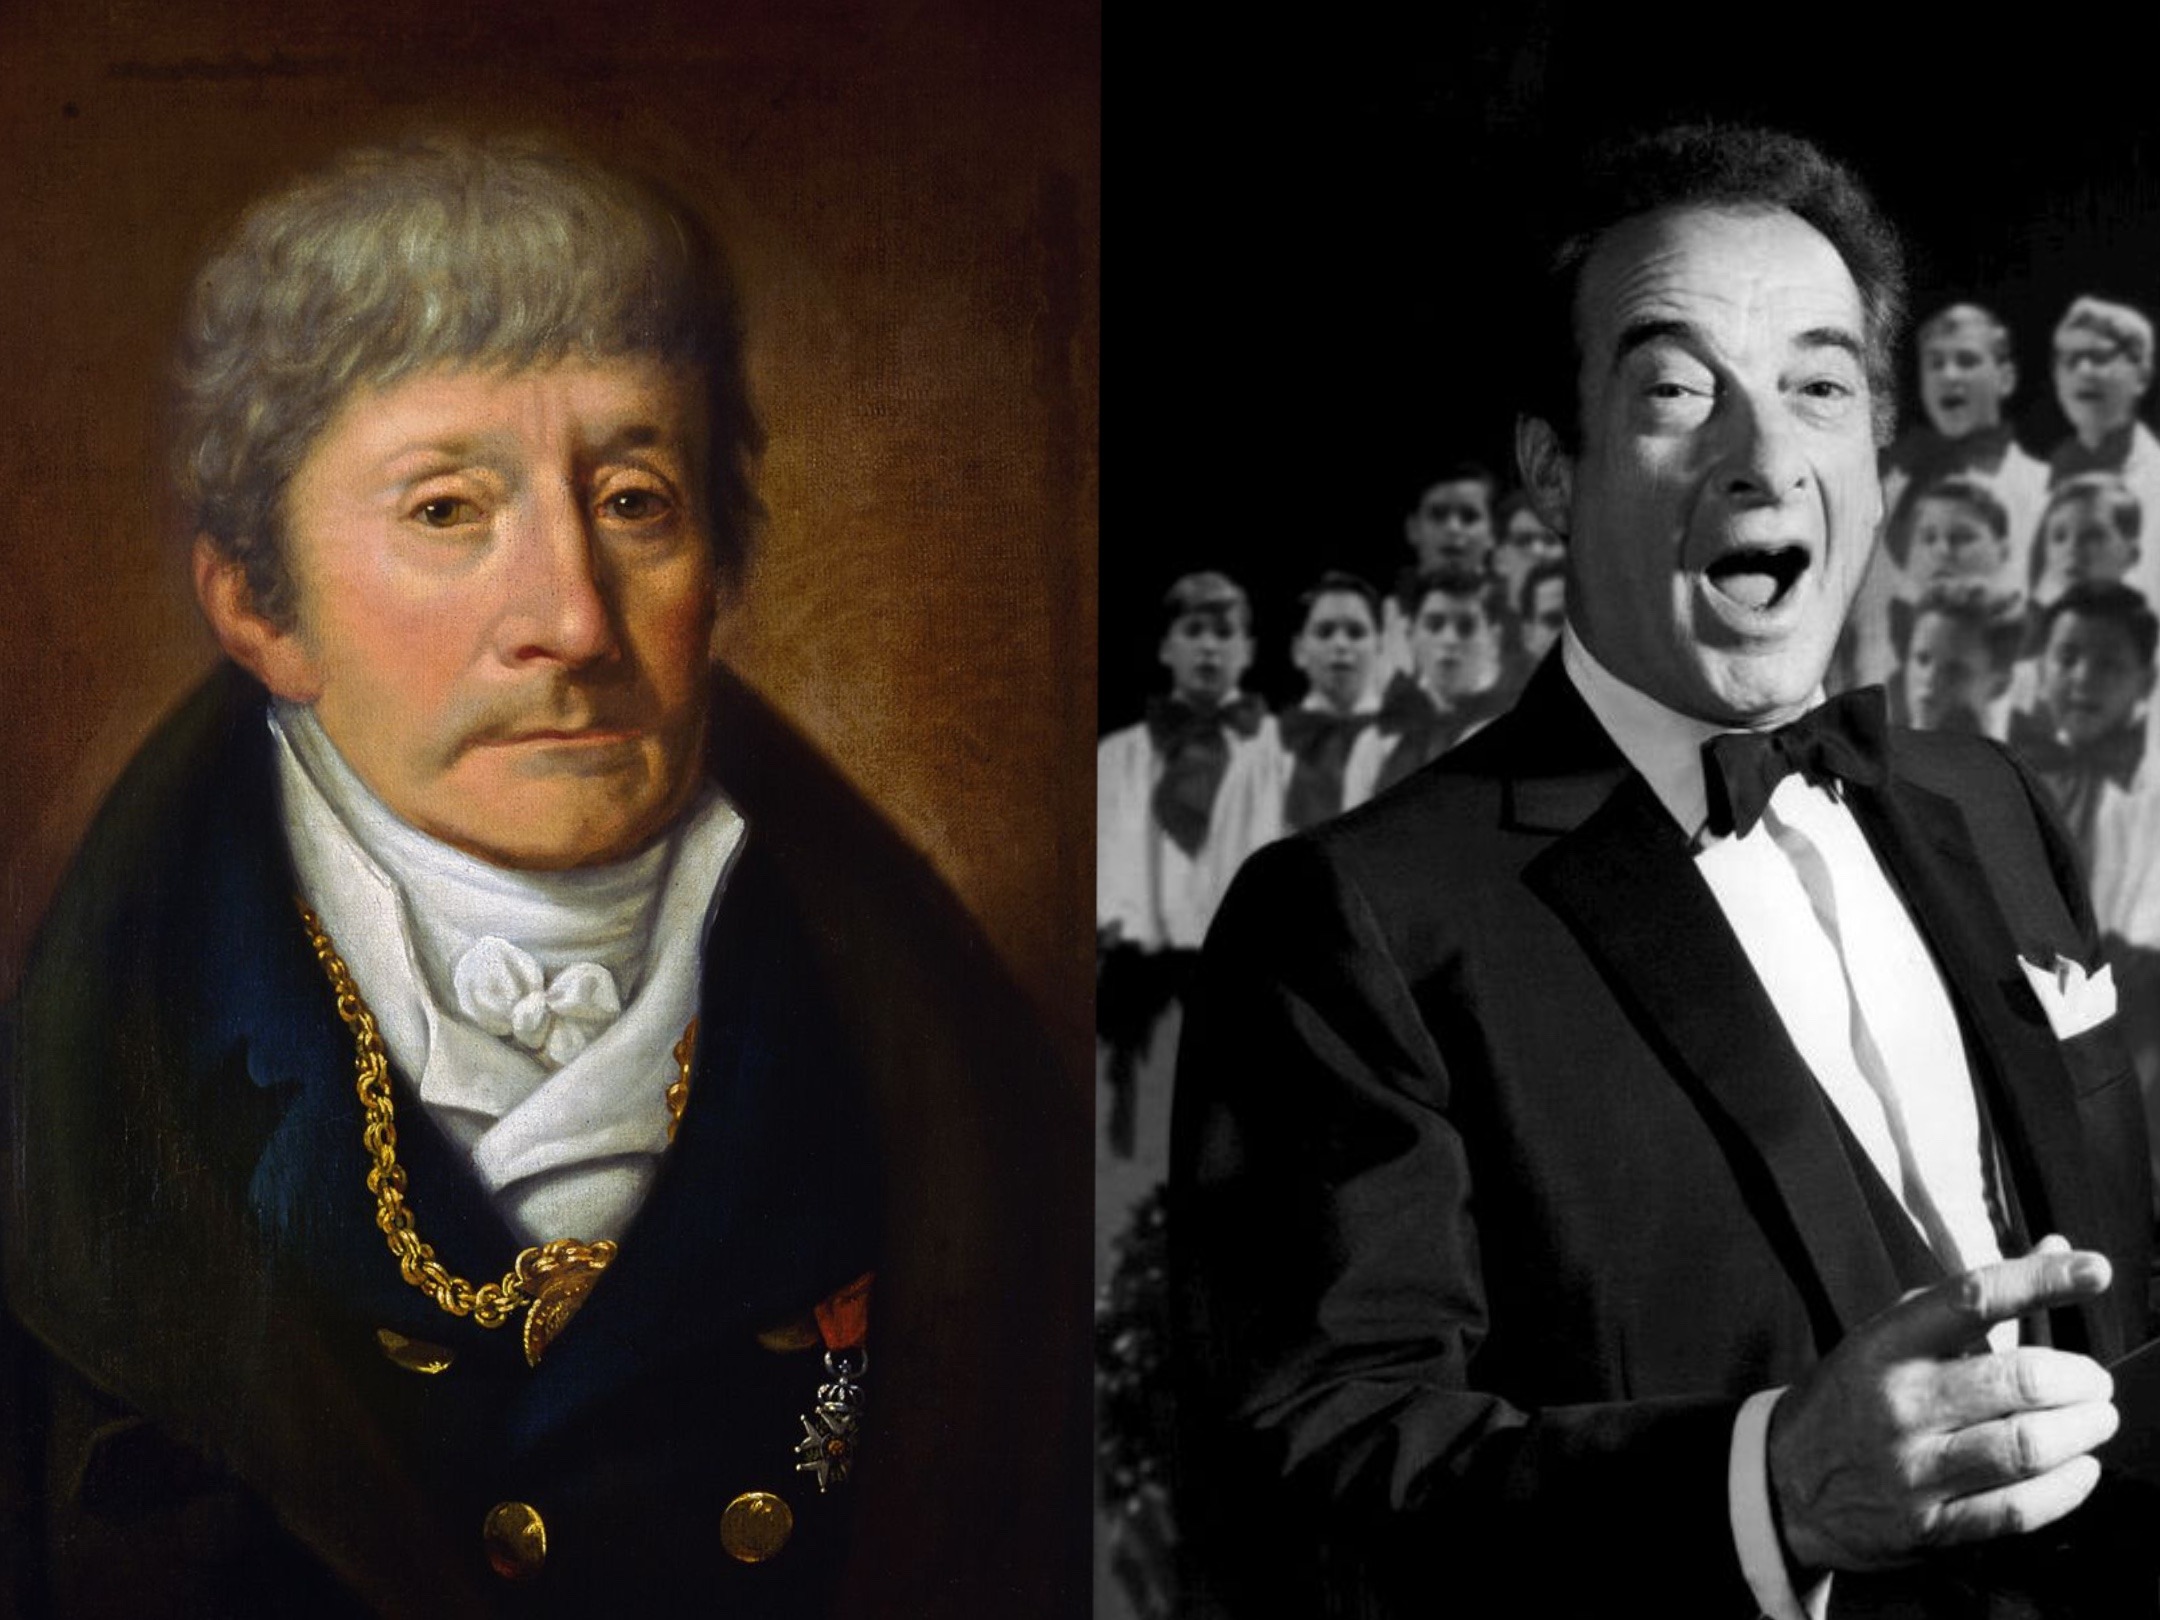 Antonio Salieri, left, to Victor Borge, passing the baton down a line of a century of master keyboardists. CREDIT: via Wikamedia Commons